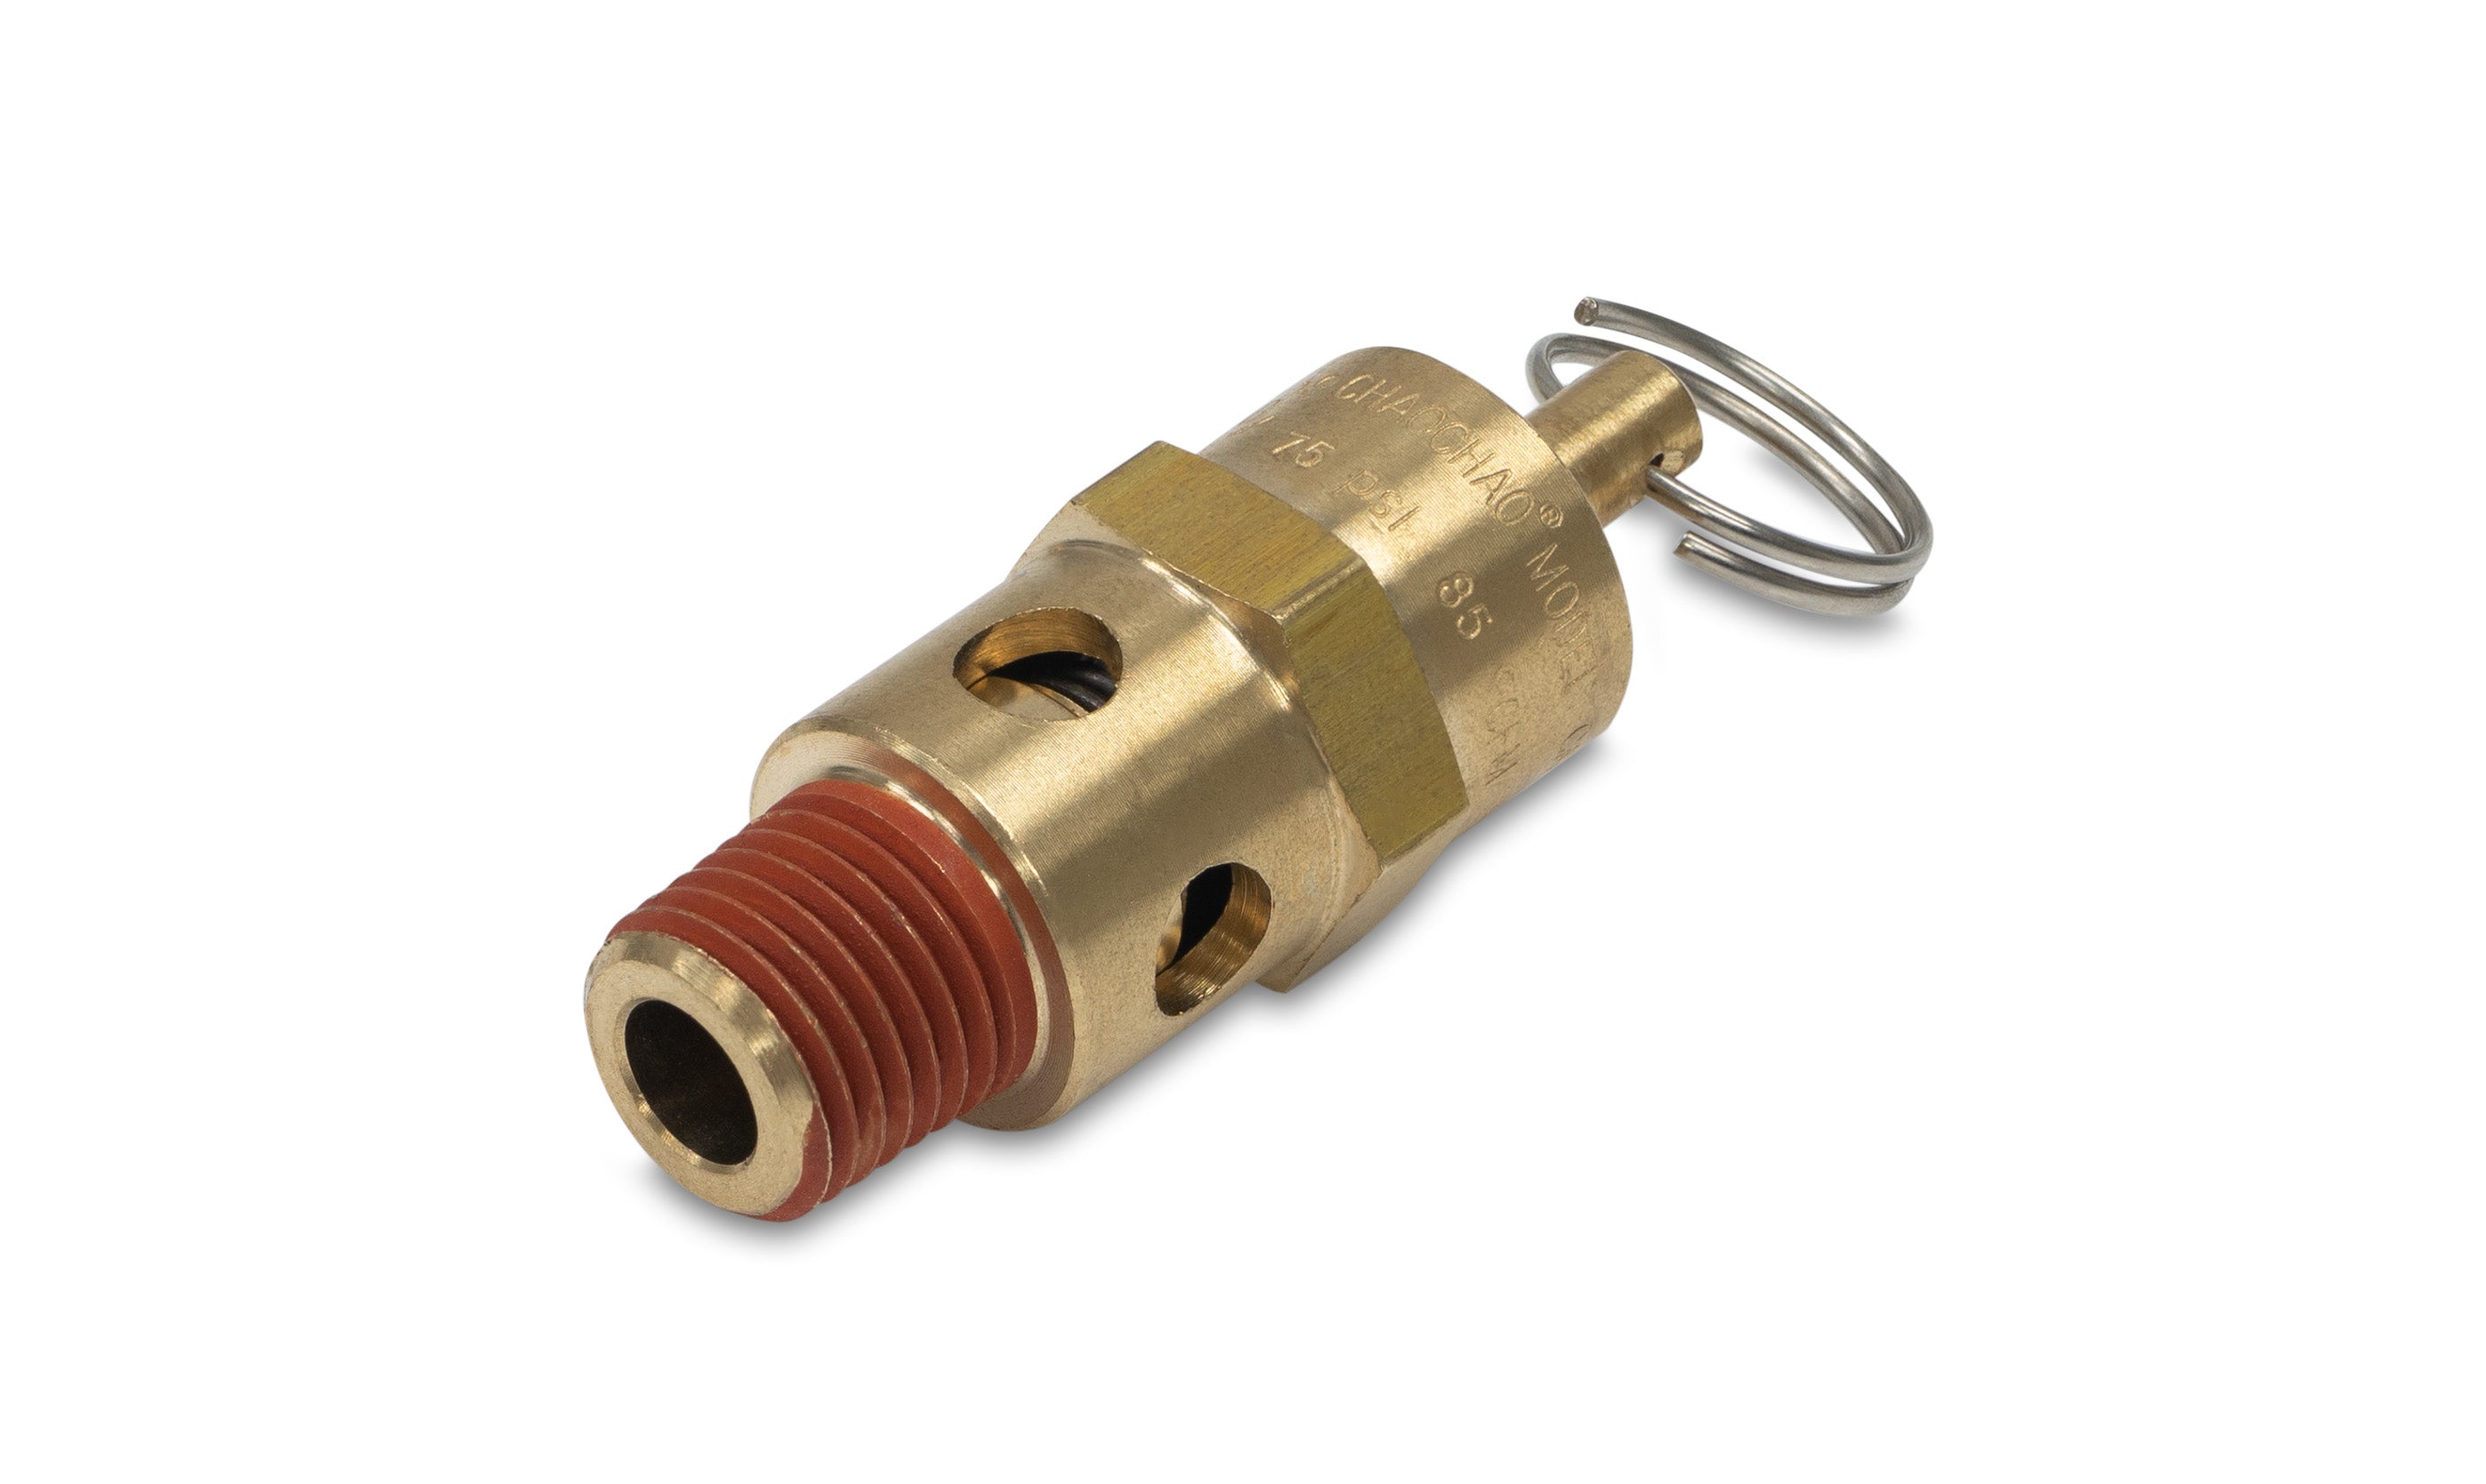 ASME-Code Fast-Acting Pressure-Relief Valve for Air, Silicone Seal, 1/4 NPT Shop All Categories BVV 75PSI 